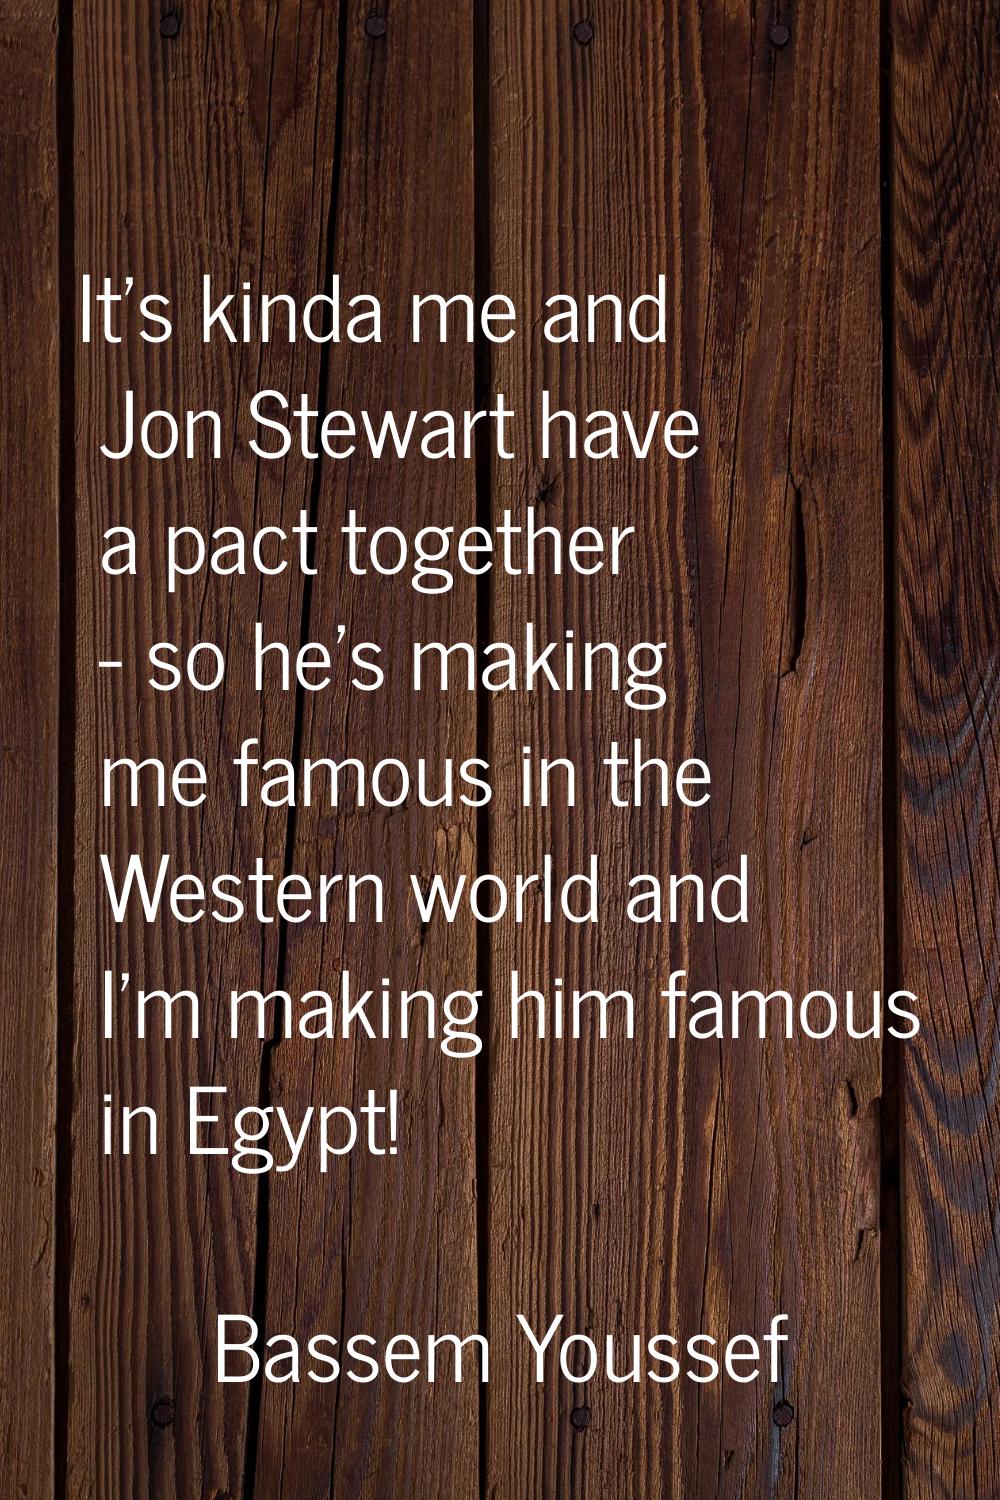 It's kinda me and Jon Stewart have a pact together - so he's making me famous in the Western world 